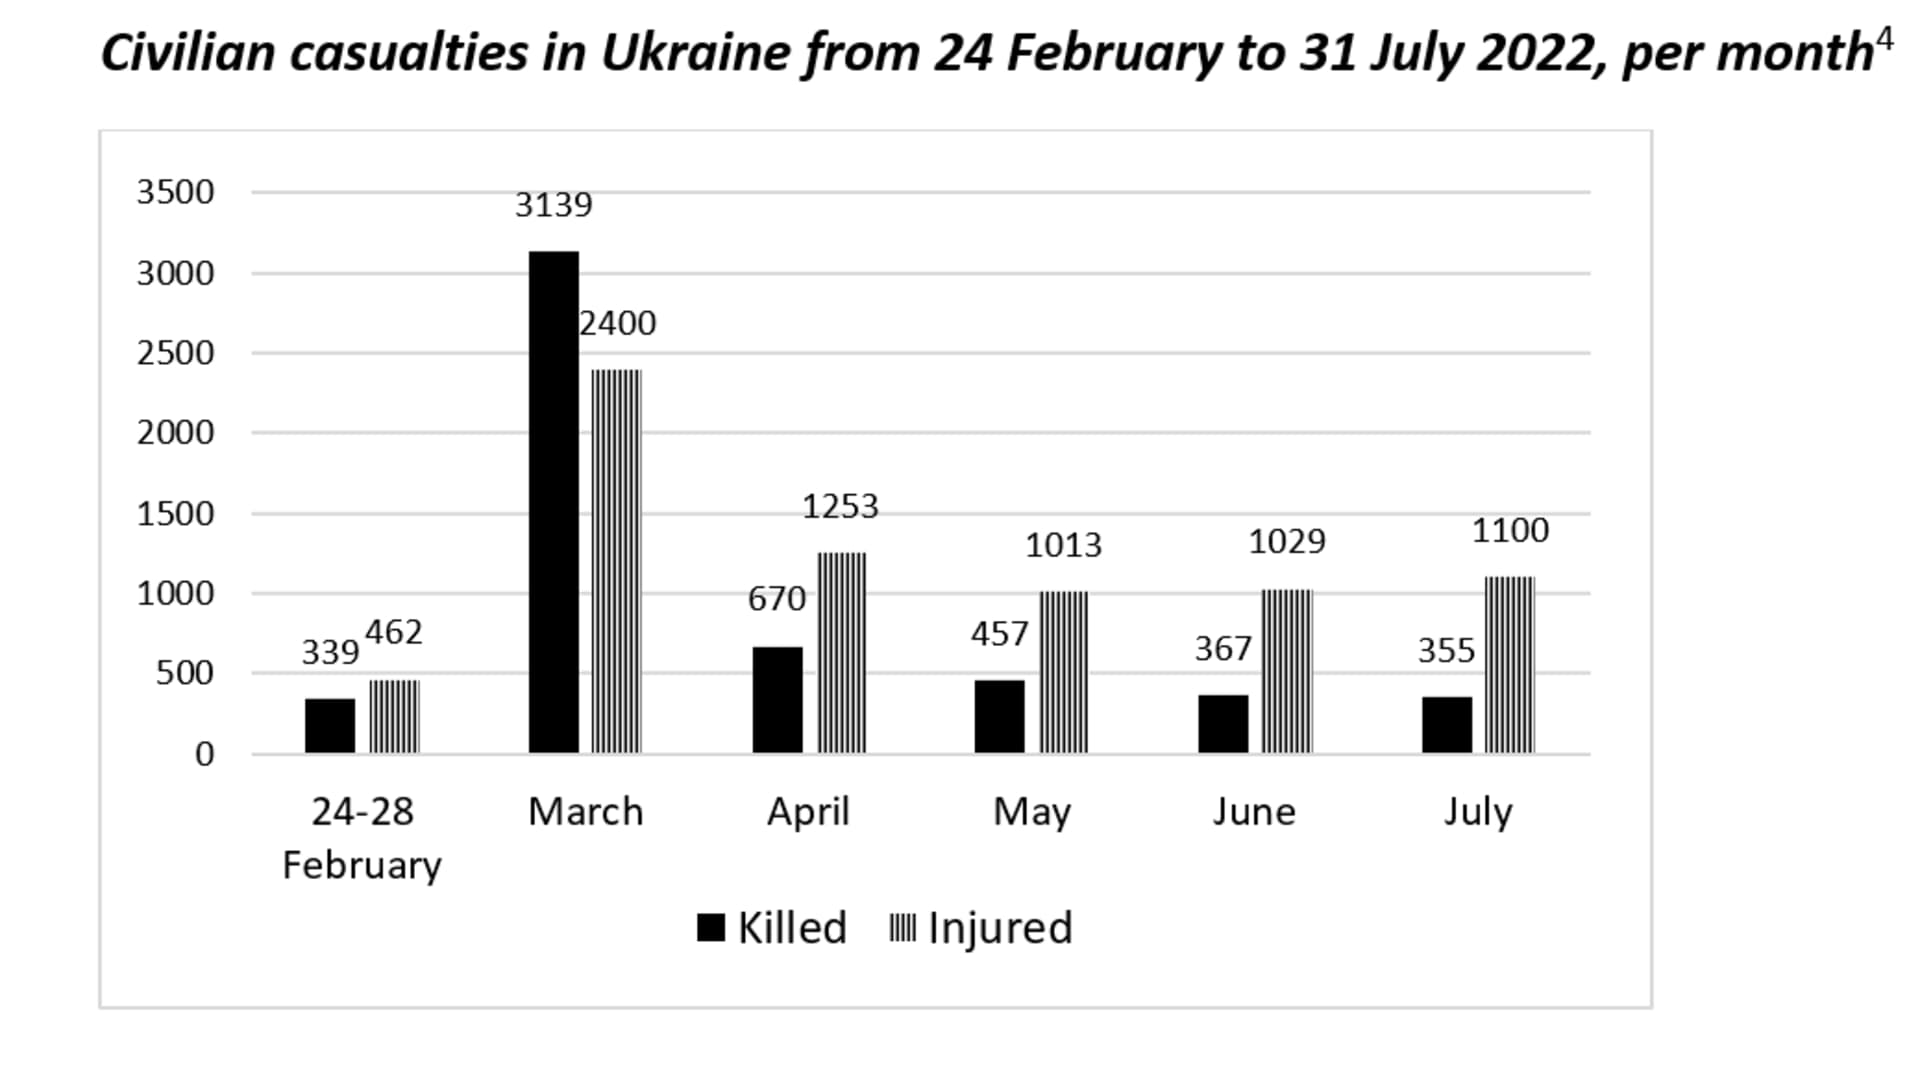 Total civilian casualties from 24 February to 31 July 2022 as compiled by the United Nations.